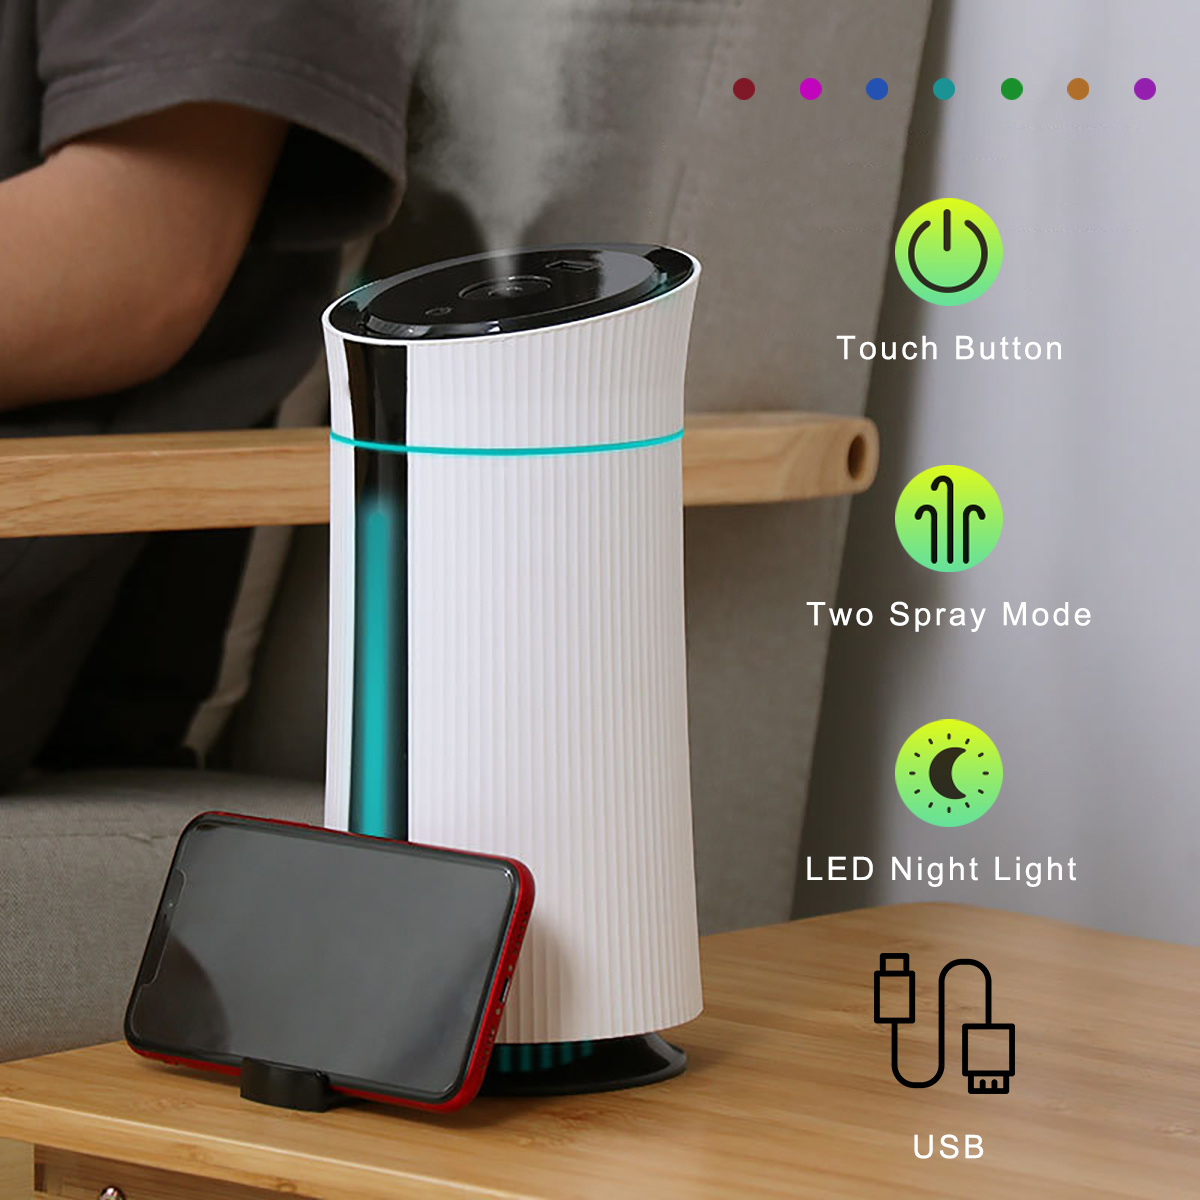 Portable-USB-Humidifier-2-Gear-Spray-Mode-Air-Diffuser-Purifier-Cool-Mist-Colorful-LED-Night-Light-L-1835241-1